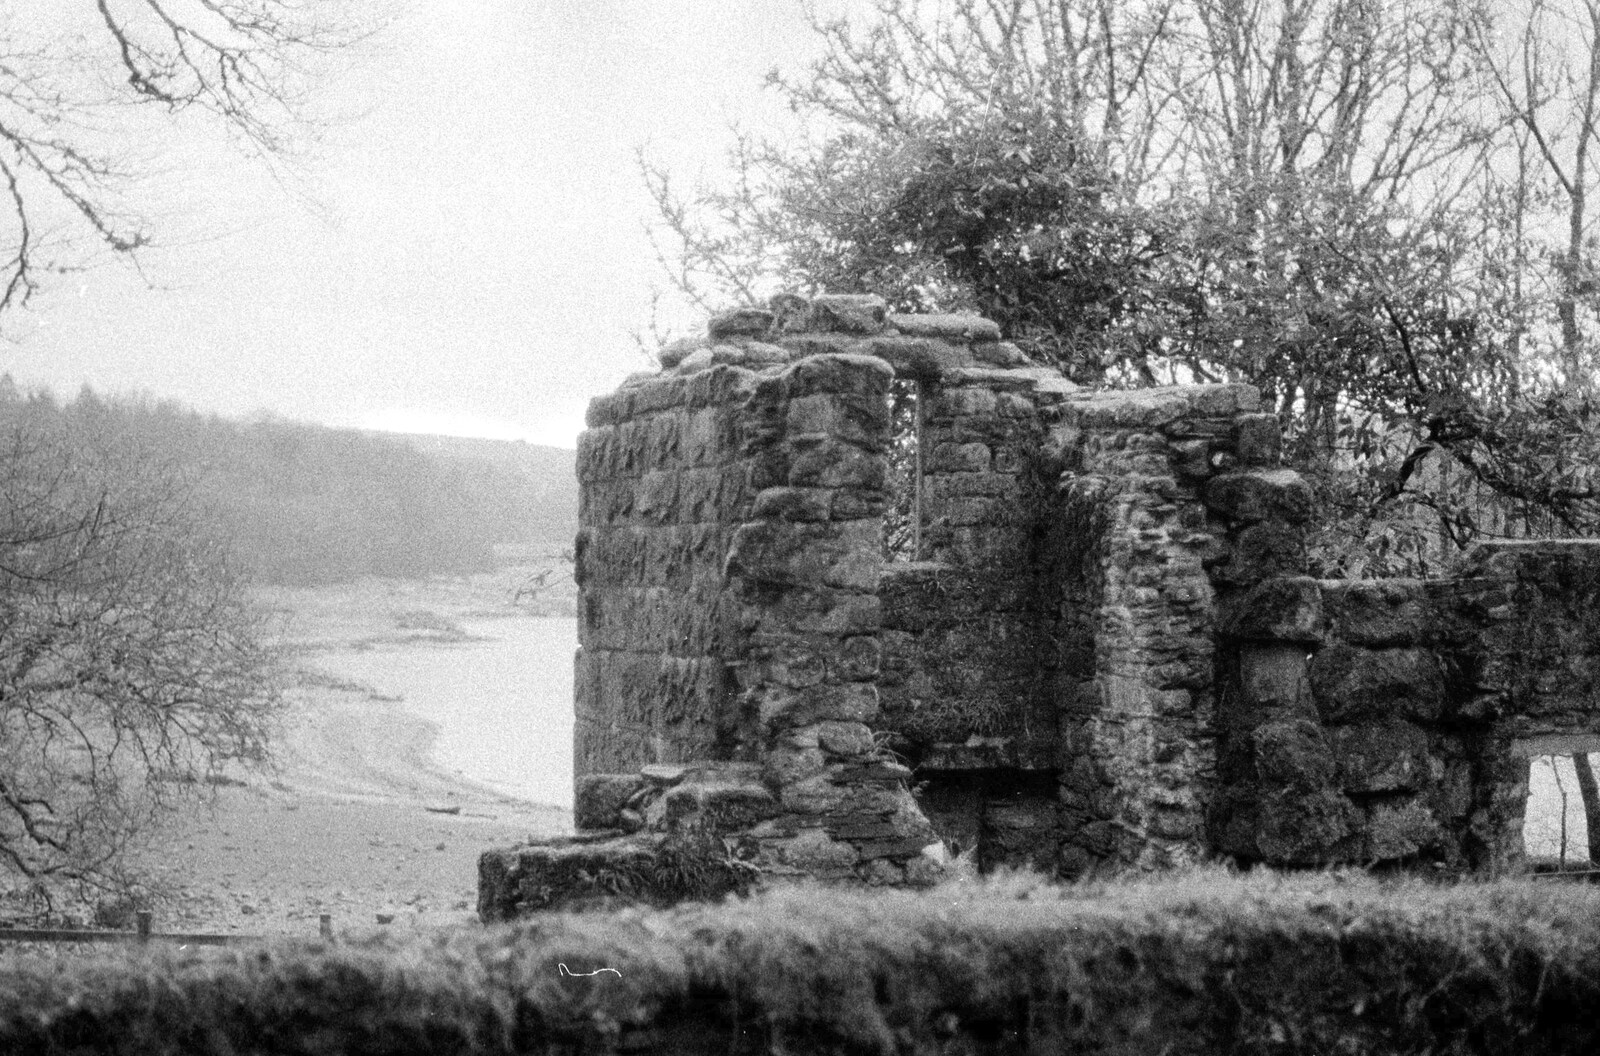 Derelict stone cottage by Burrator from Sis's Nearly-Christmas Wedding, Meavy, Dartmoor - 20th December 2003